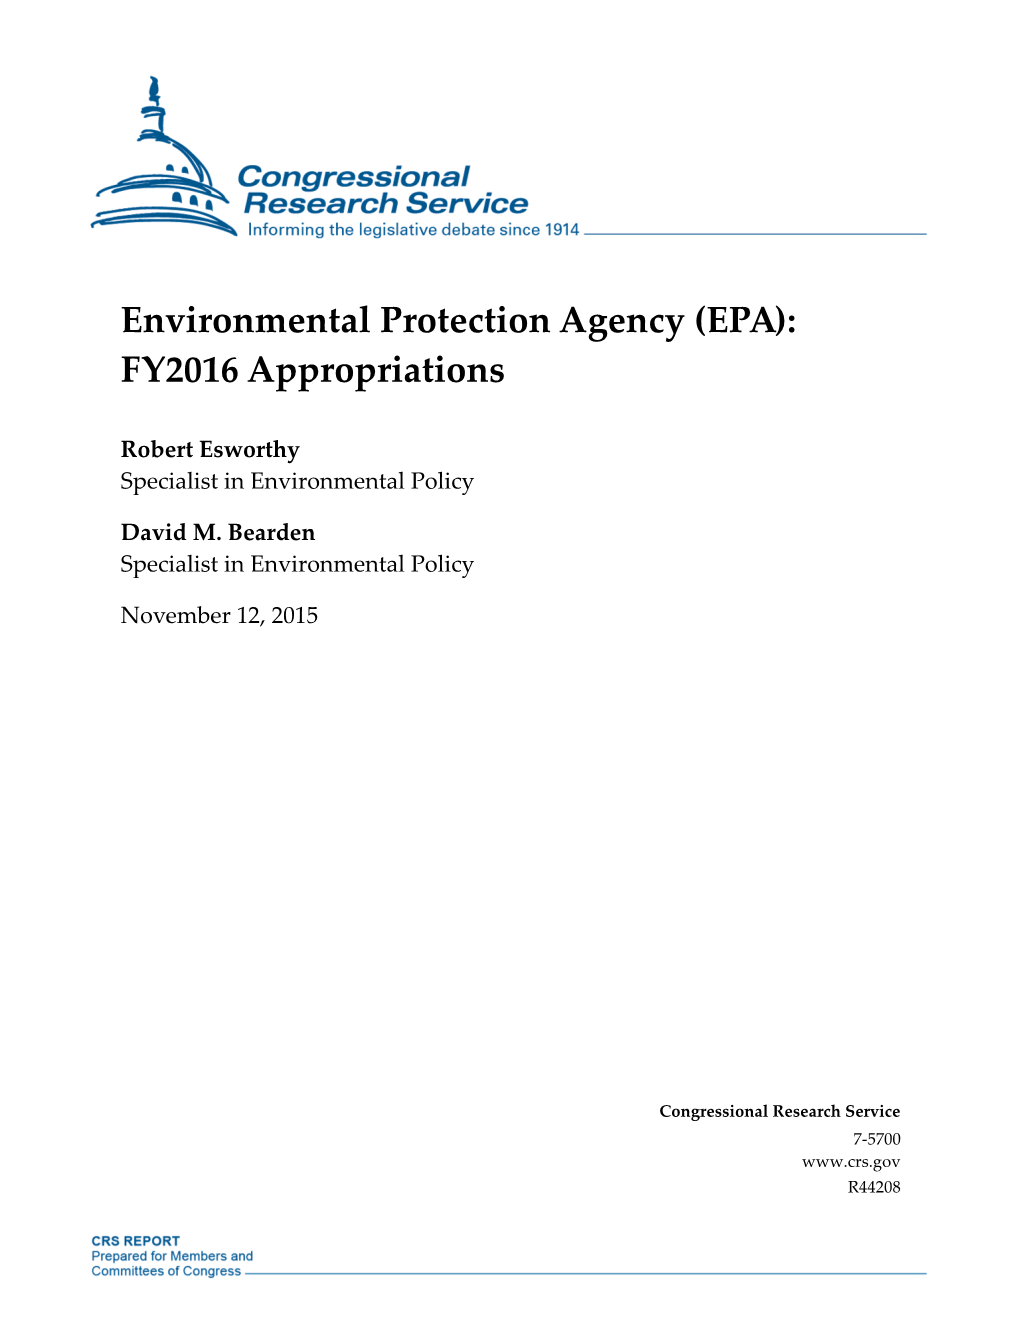 Environmental Protection Agency (EPA): FY2016 Appropriations